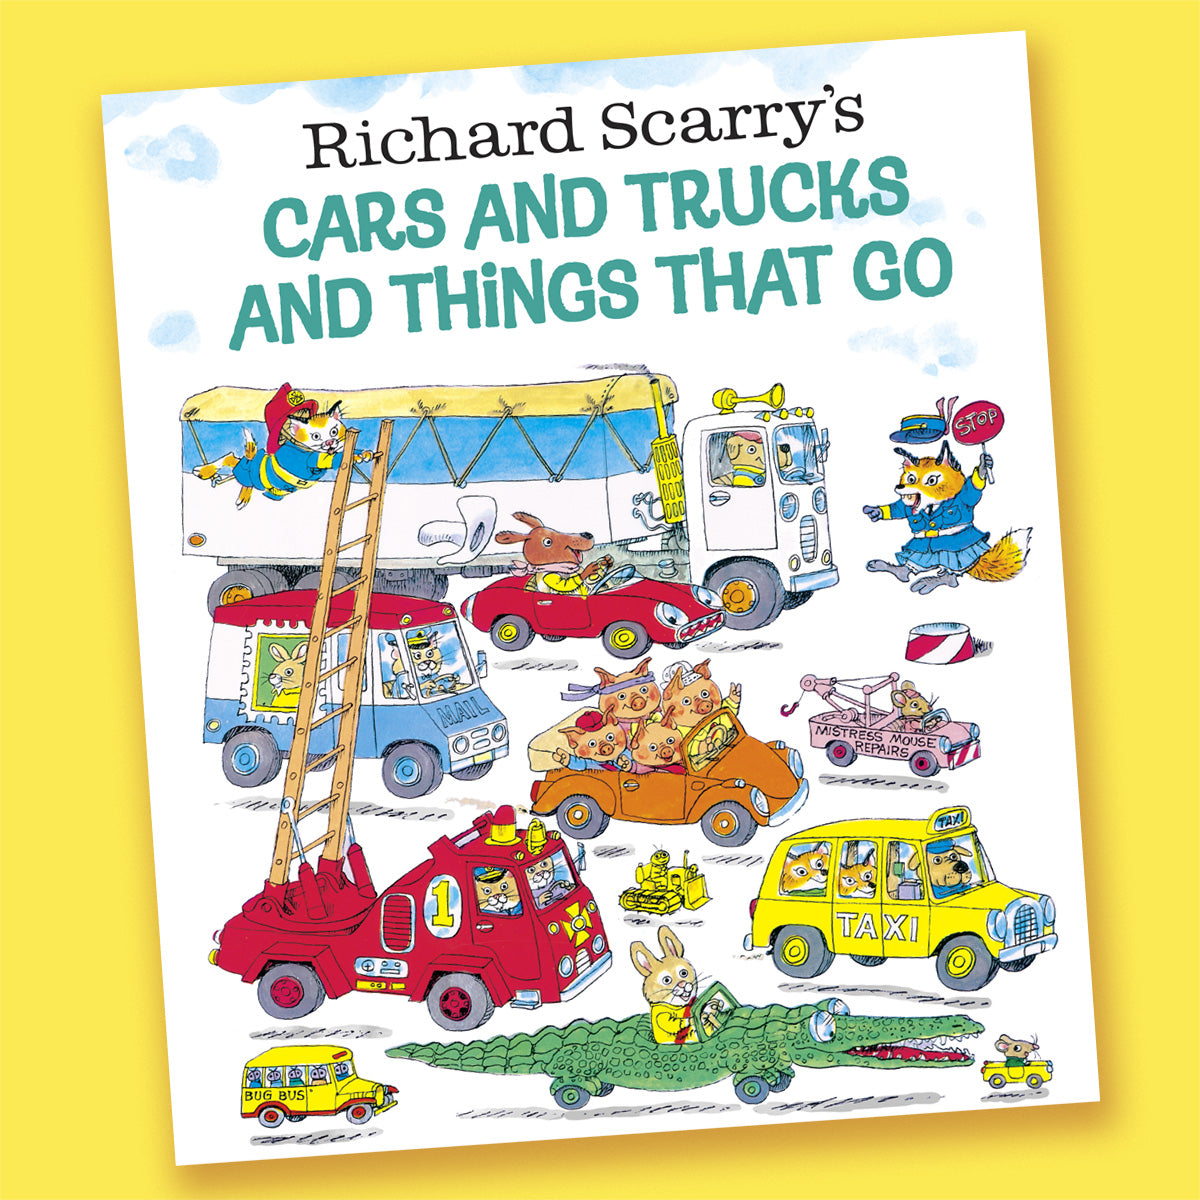 Richard Scarry's Cars and Trucks and Things That Go by Richard Scarry